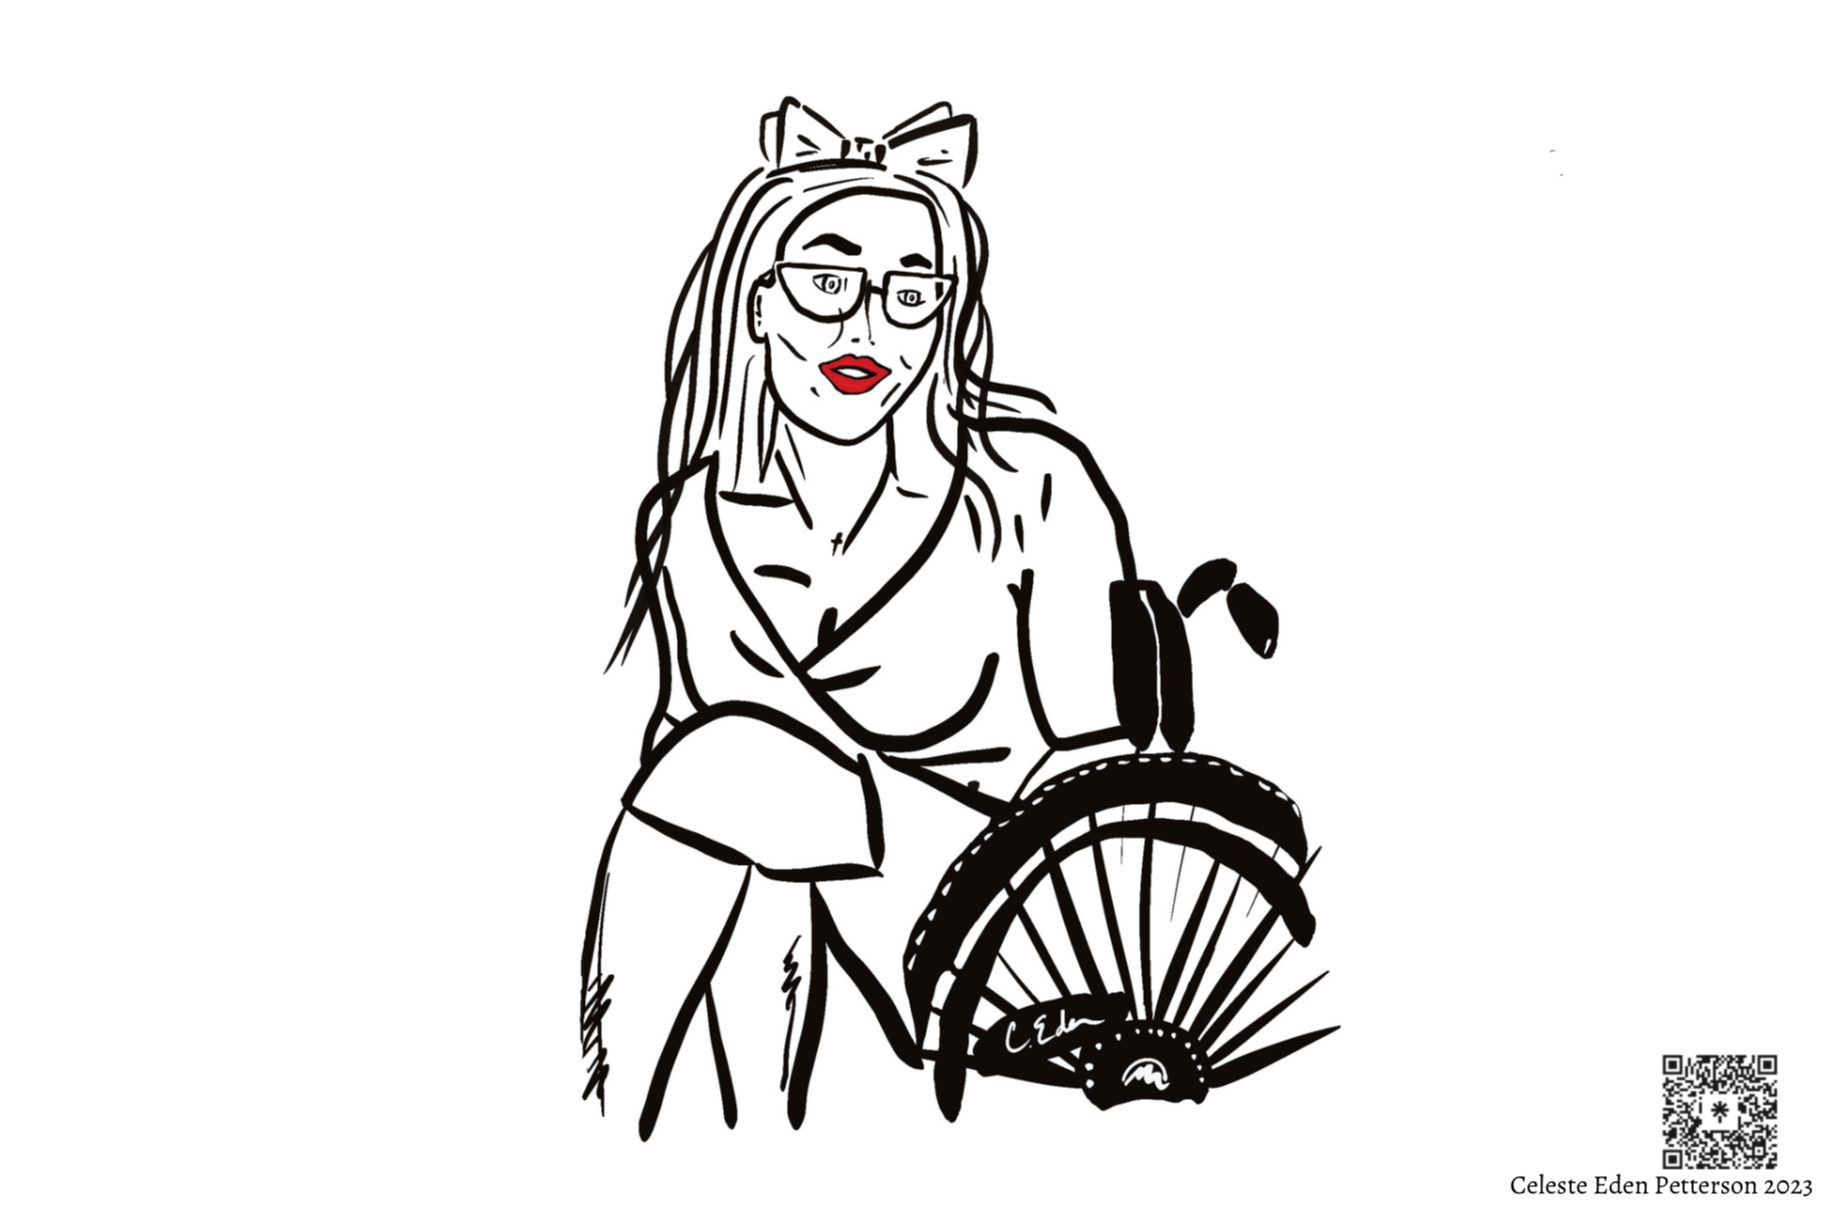 A drawing of a person in a wheelchair with red lipstick